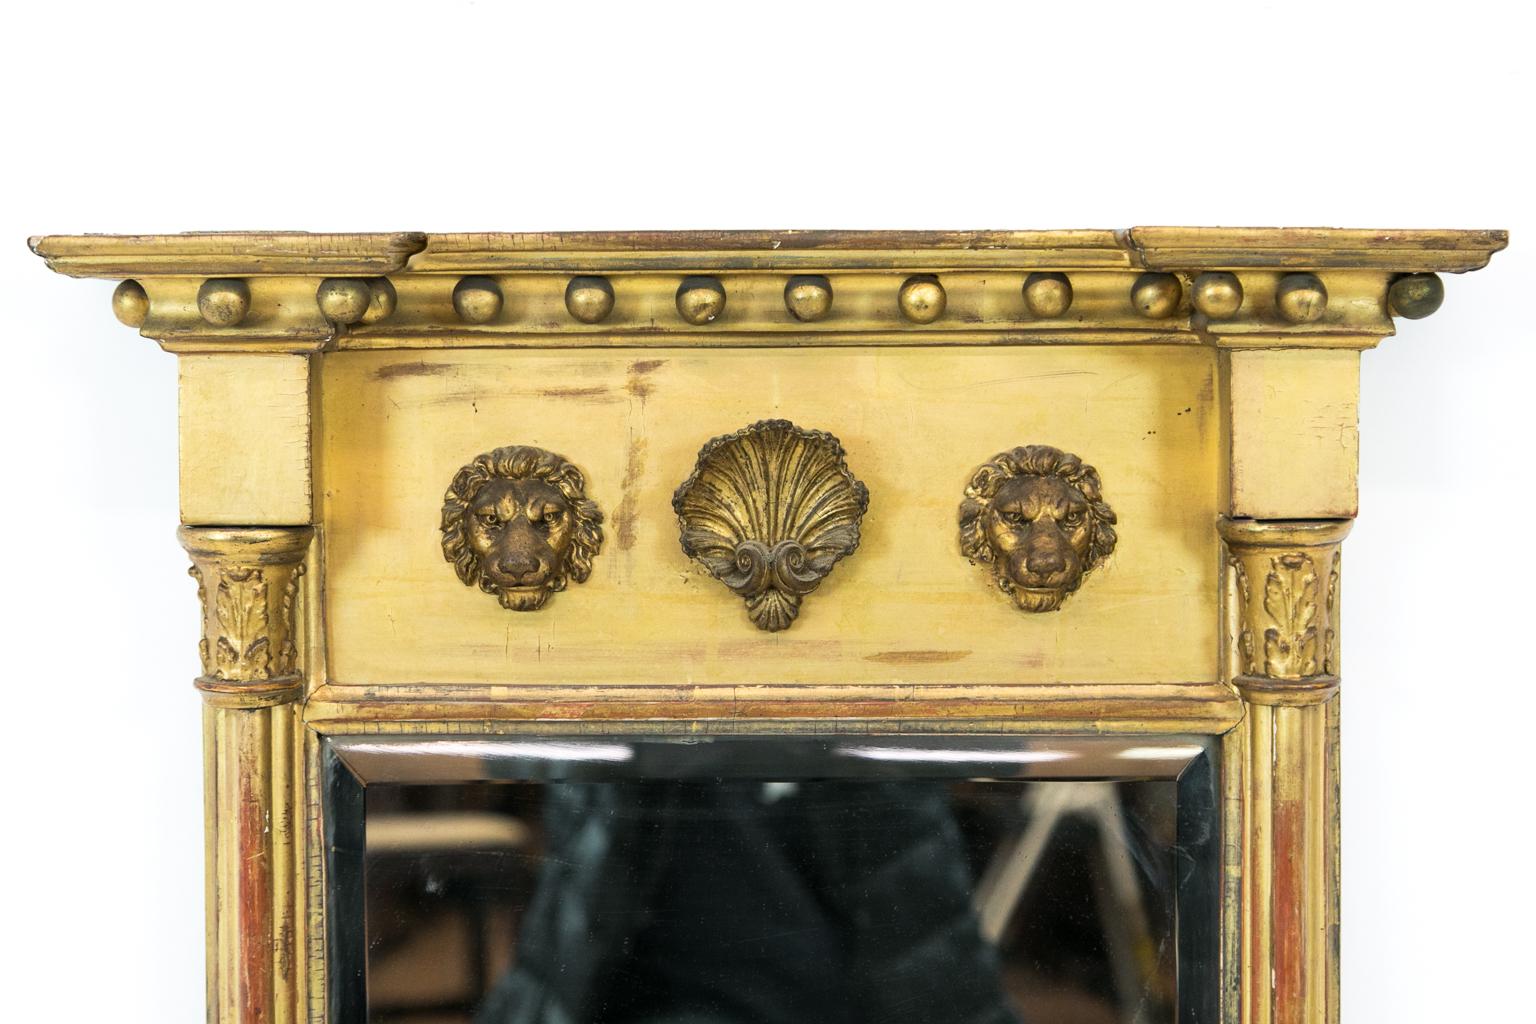 Gilt Regency mirror, the cornice has balls, and the frieze has two lion masks with a scallop shell carved in high relief. The styles are sanded cluster columned and have an acanthus carved capital at the top. The mirror has a three quarter inch